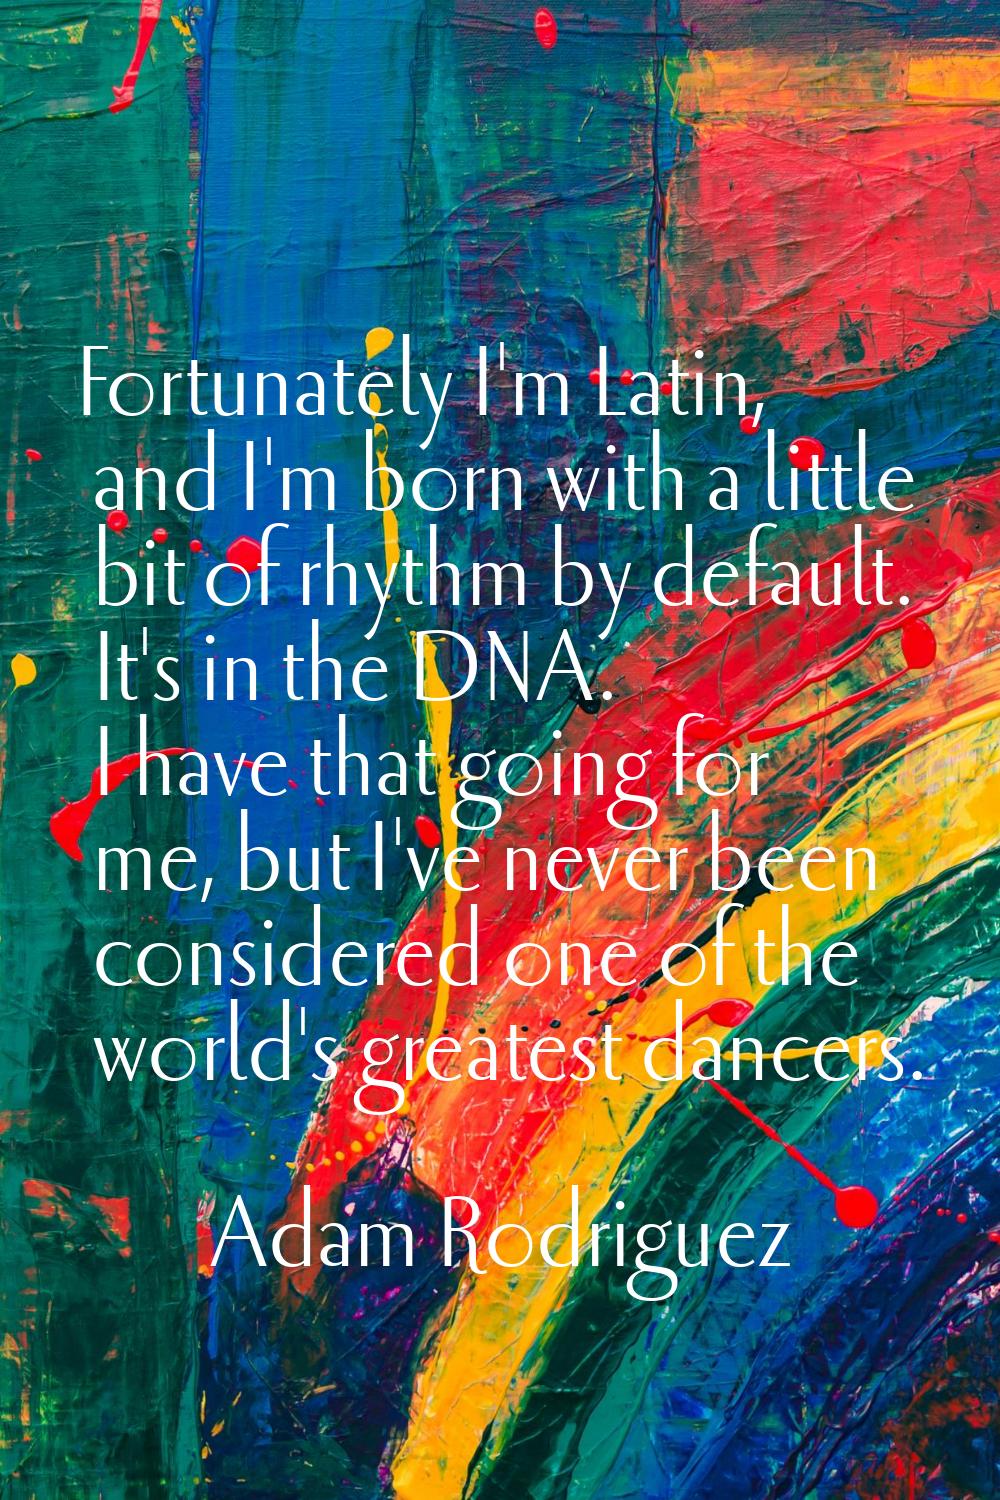 Fortunately I'm Latin, and I'm born with a little bit of rhythm by default. It's in the DNA. I have